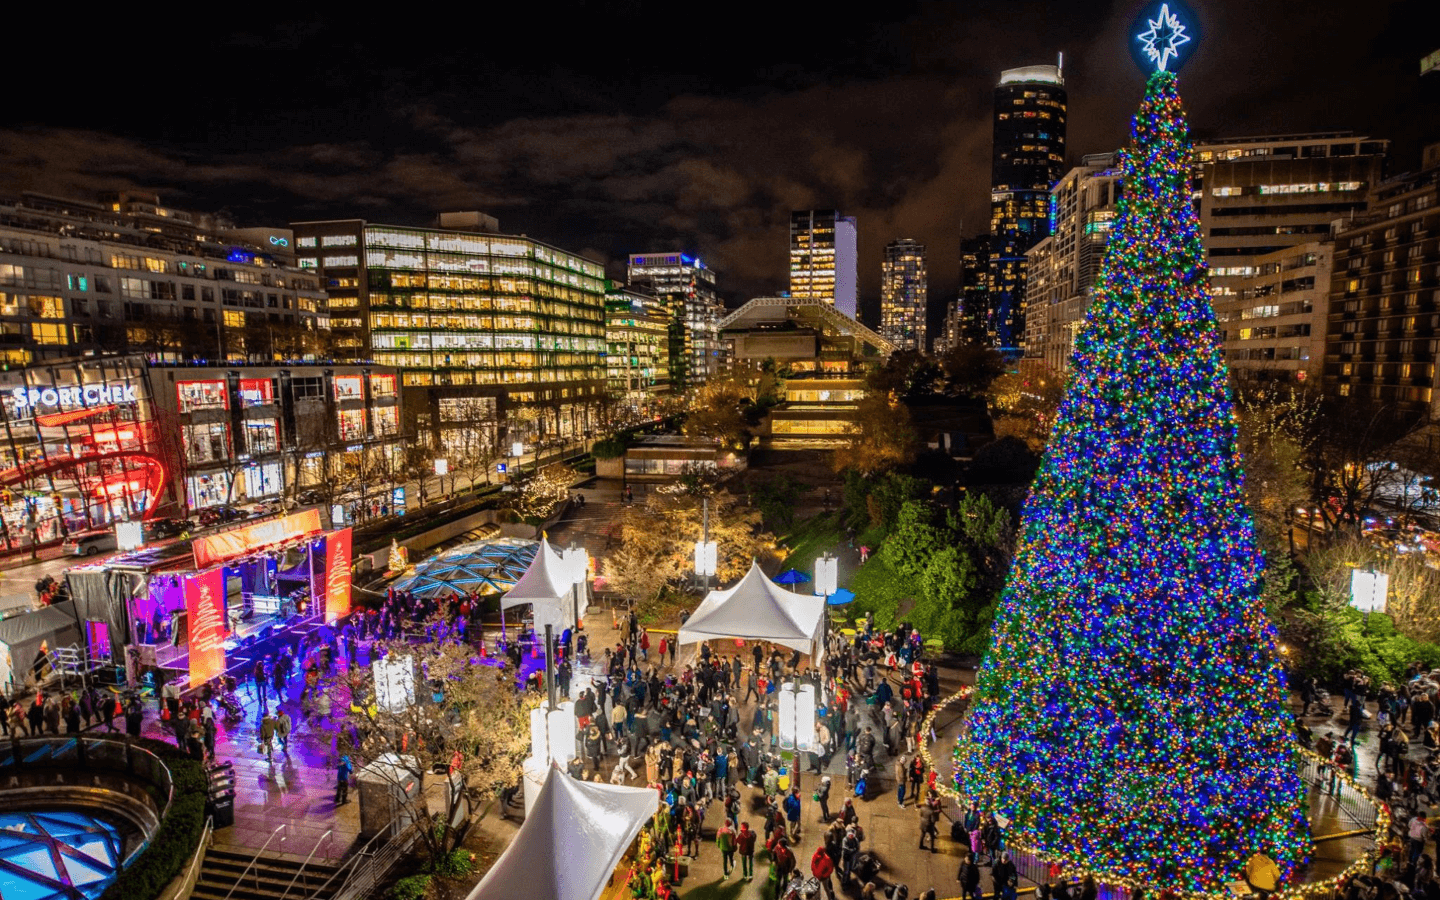 a large Christmas tree lit up at night, with crowds of people standing around it, with a buildings in the background.